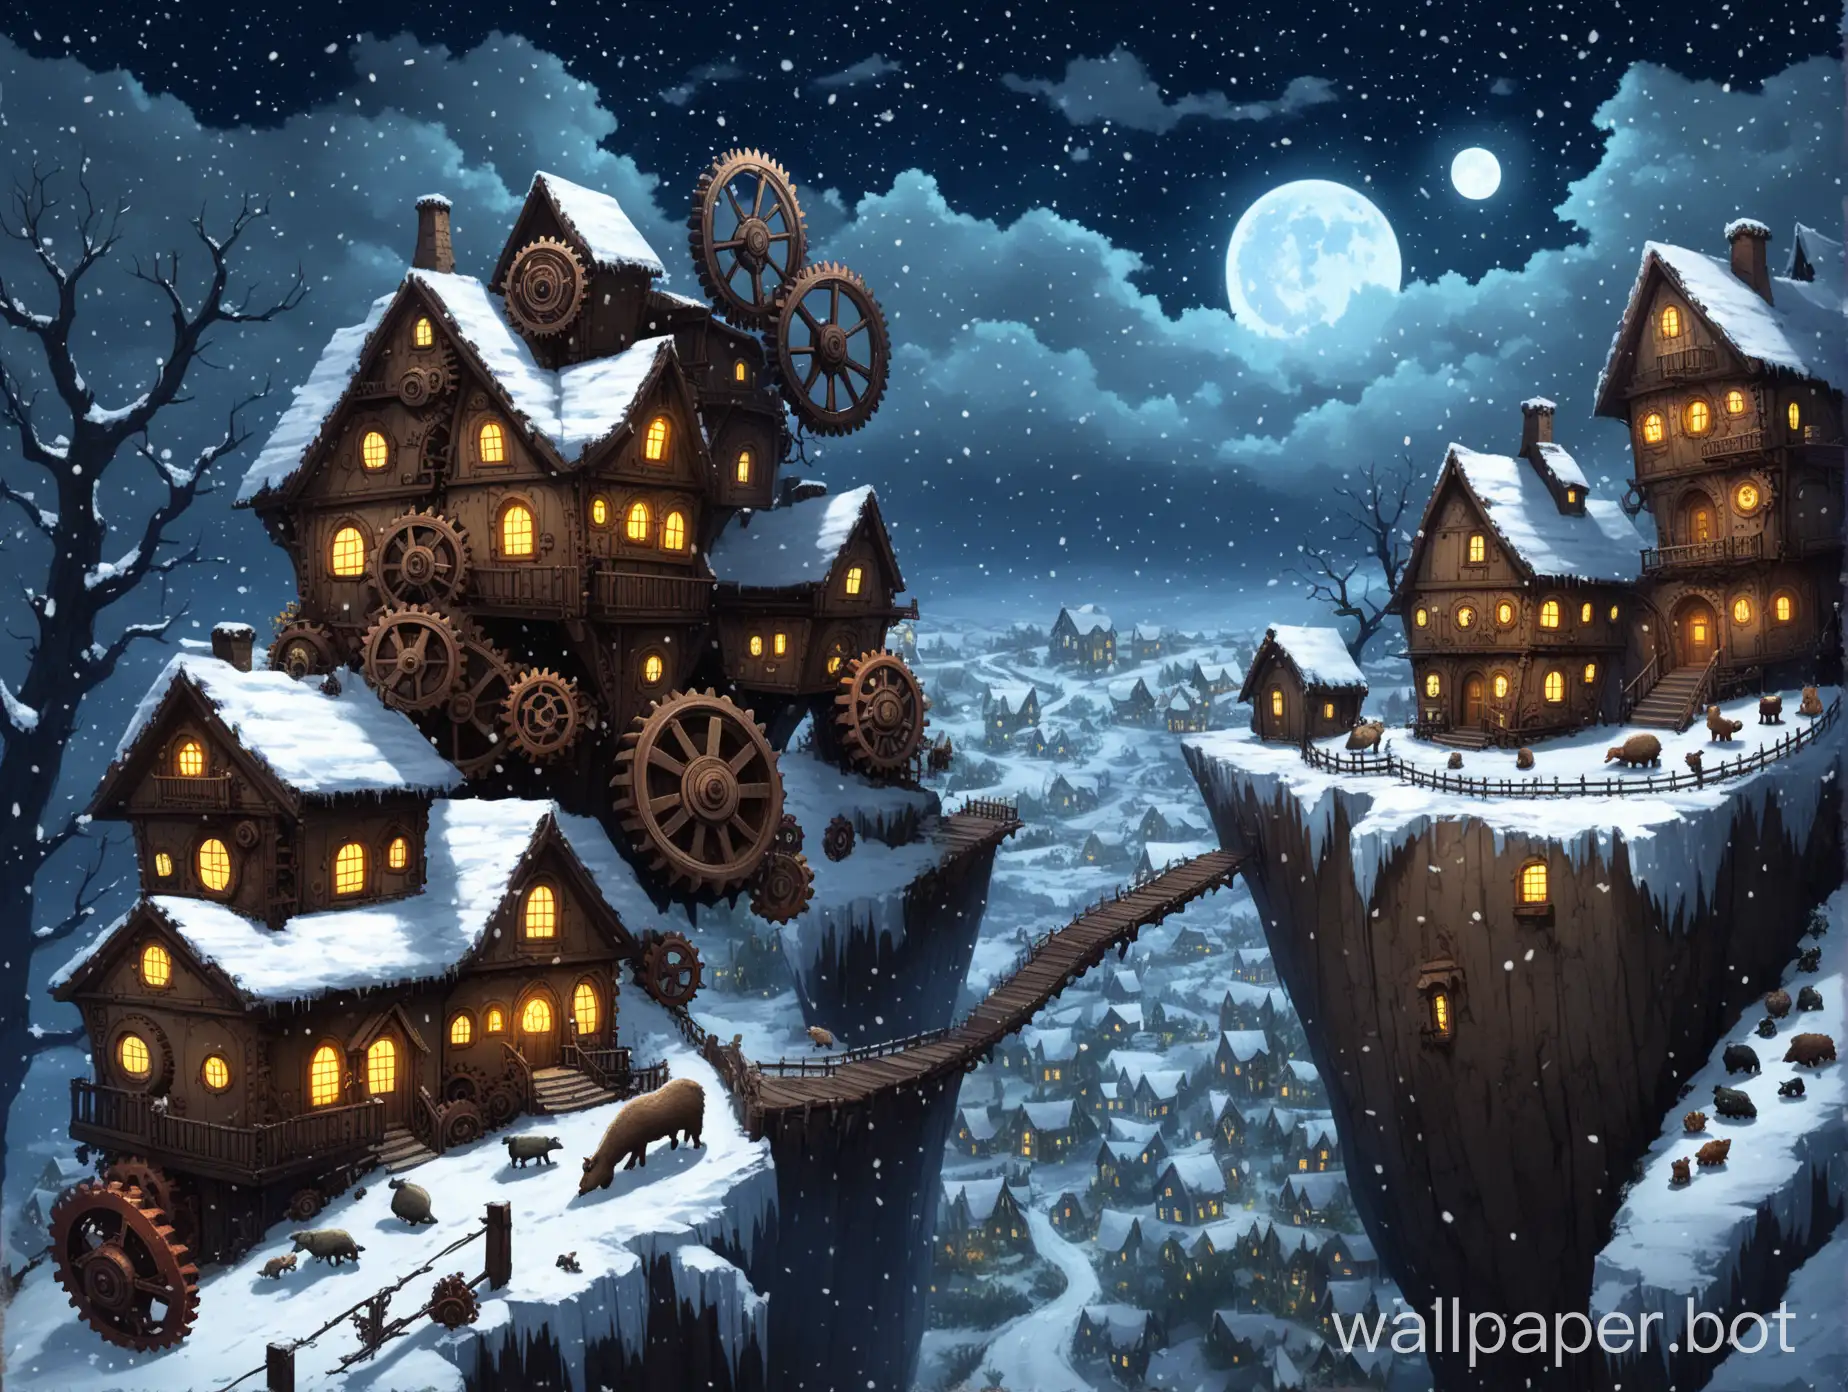 A house with many gears on the side of a cliff. There is a path from the house to a town you can see in the distance. There are some trees and some animals nearby. Its nightime and its snowing. All houses seem to have big gears on their roofs providing them with the energy they need Arcane style